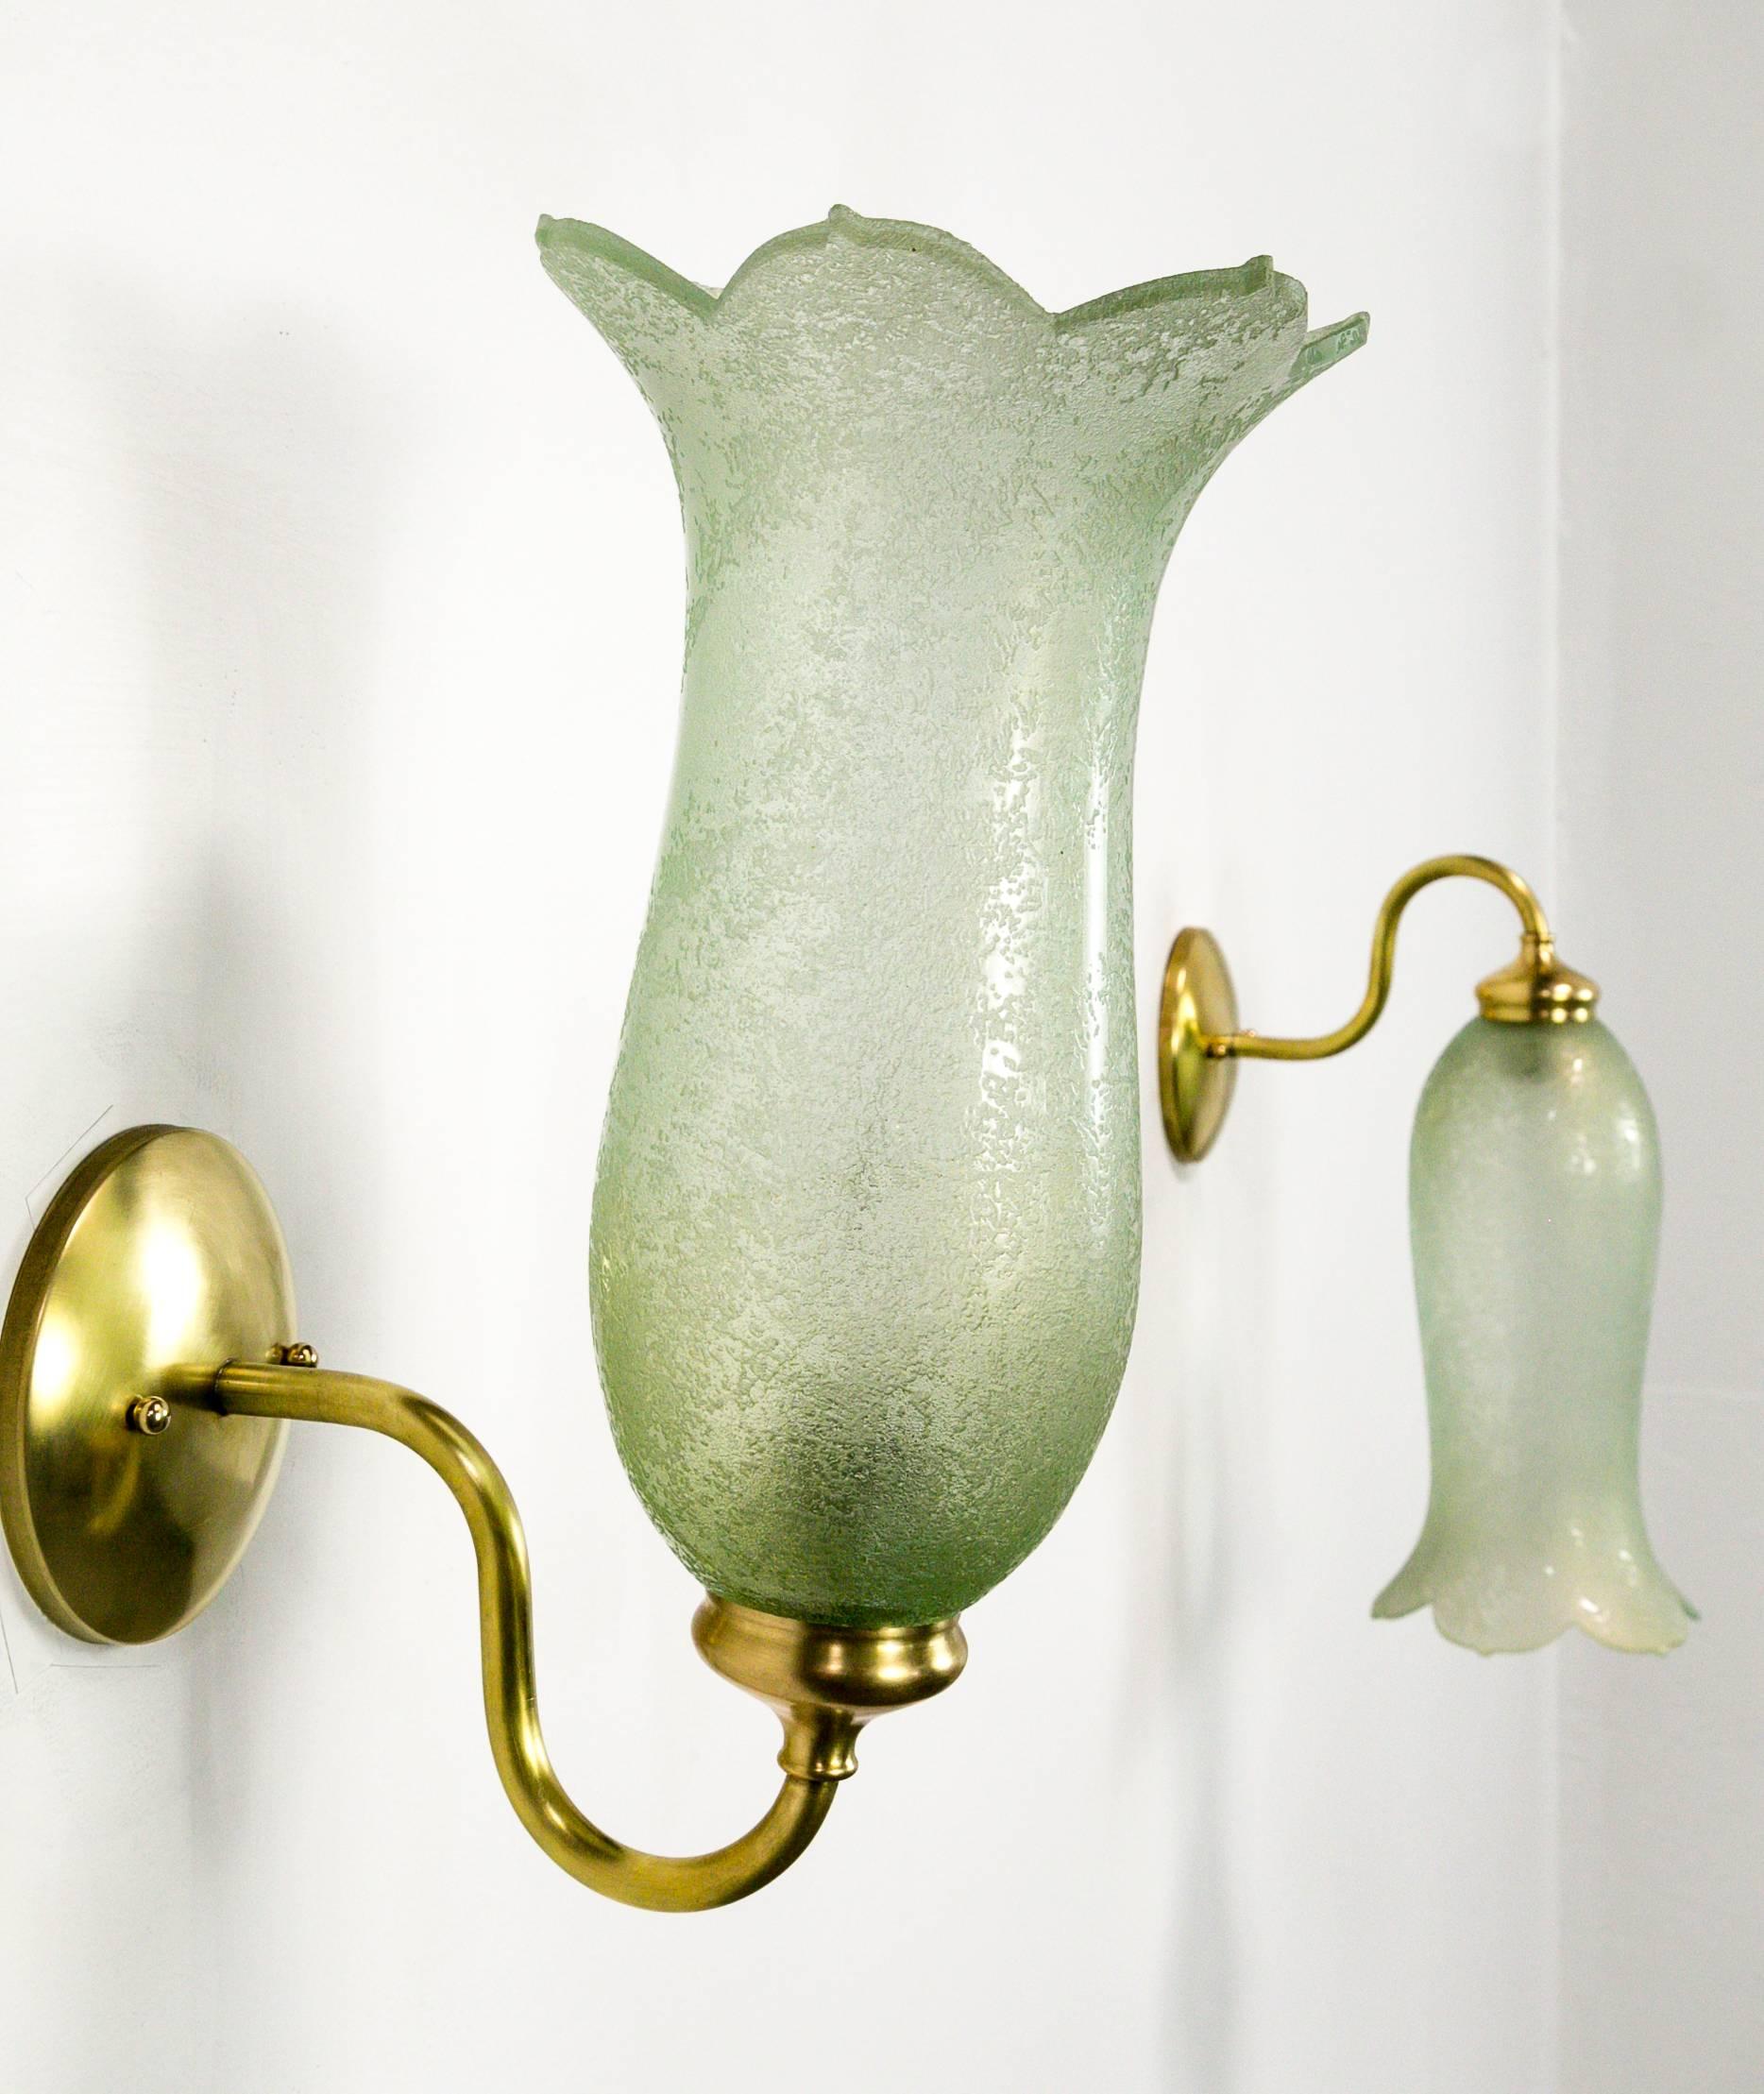 A pair of impeccably crafted, Art Nouveau bellflower shaped, textured, pale green glass shades made in the turn of the 20th century. They are mounted in clean and elegant, extended scroll arm brass. They have a timeless look that can fit a variety